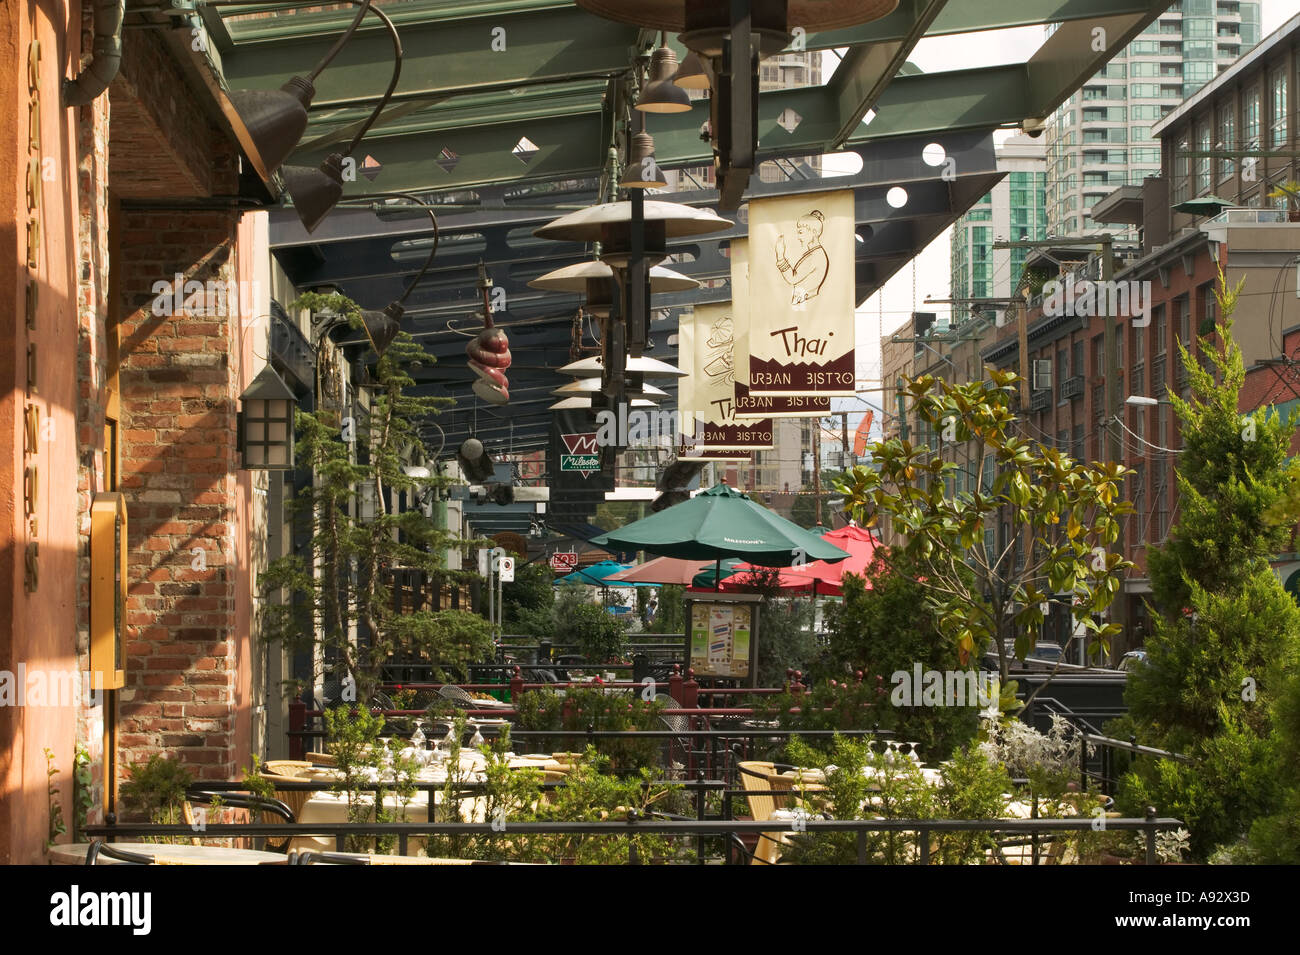 Restaurant and shopping district of Yaletown Vancouver British Columbia Canada Stock Photo